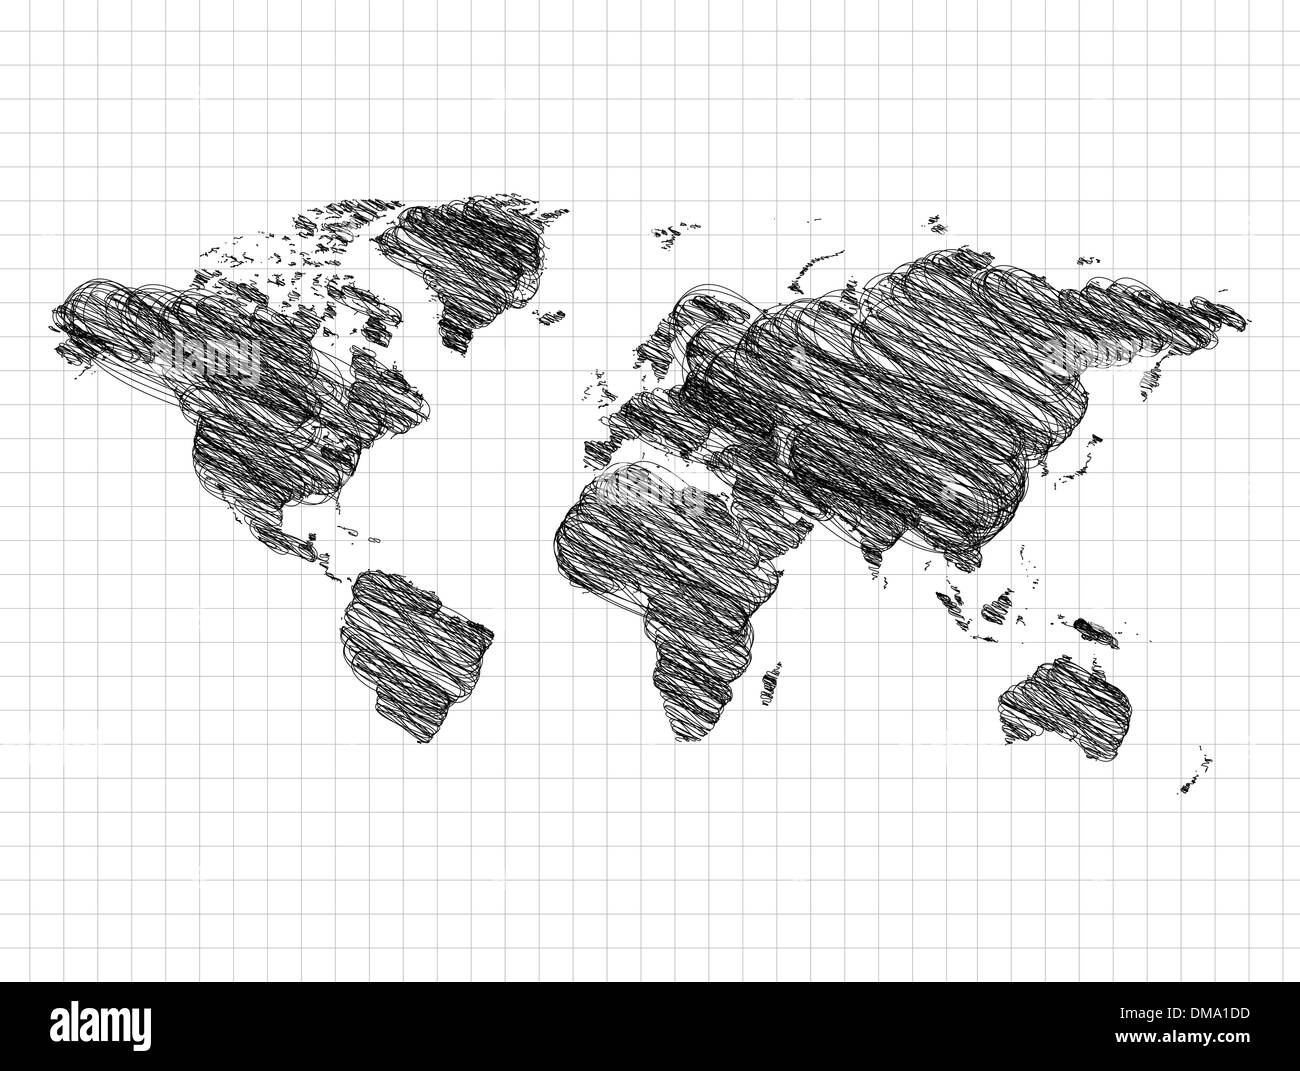 World map drawing, pencil sketch Stock Vector